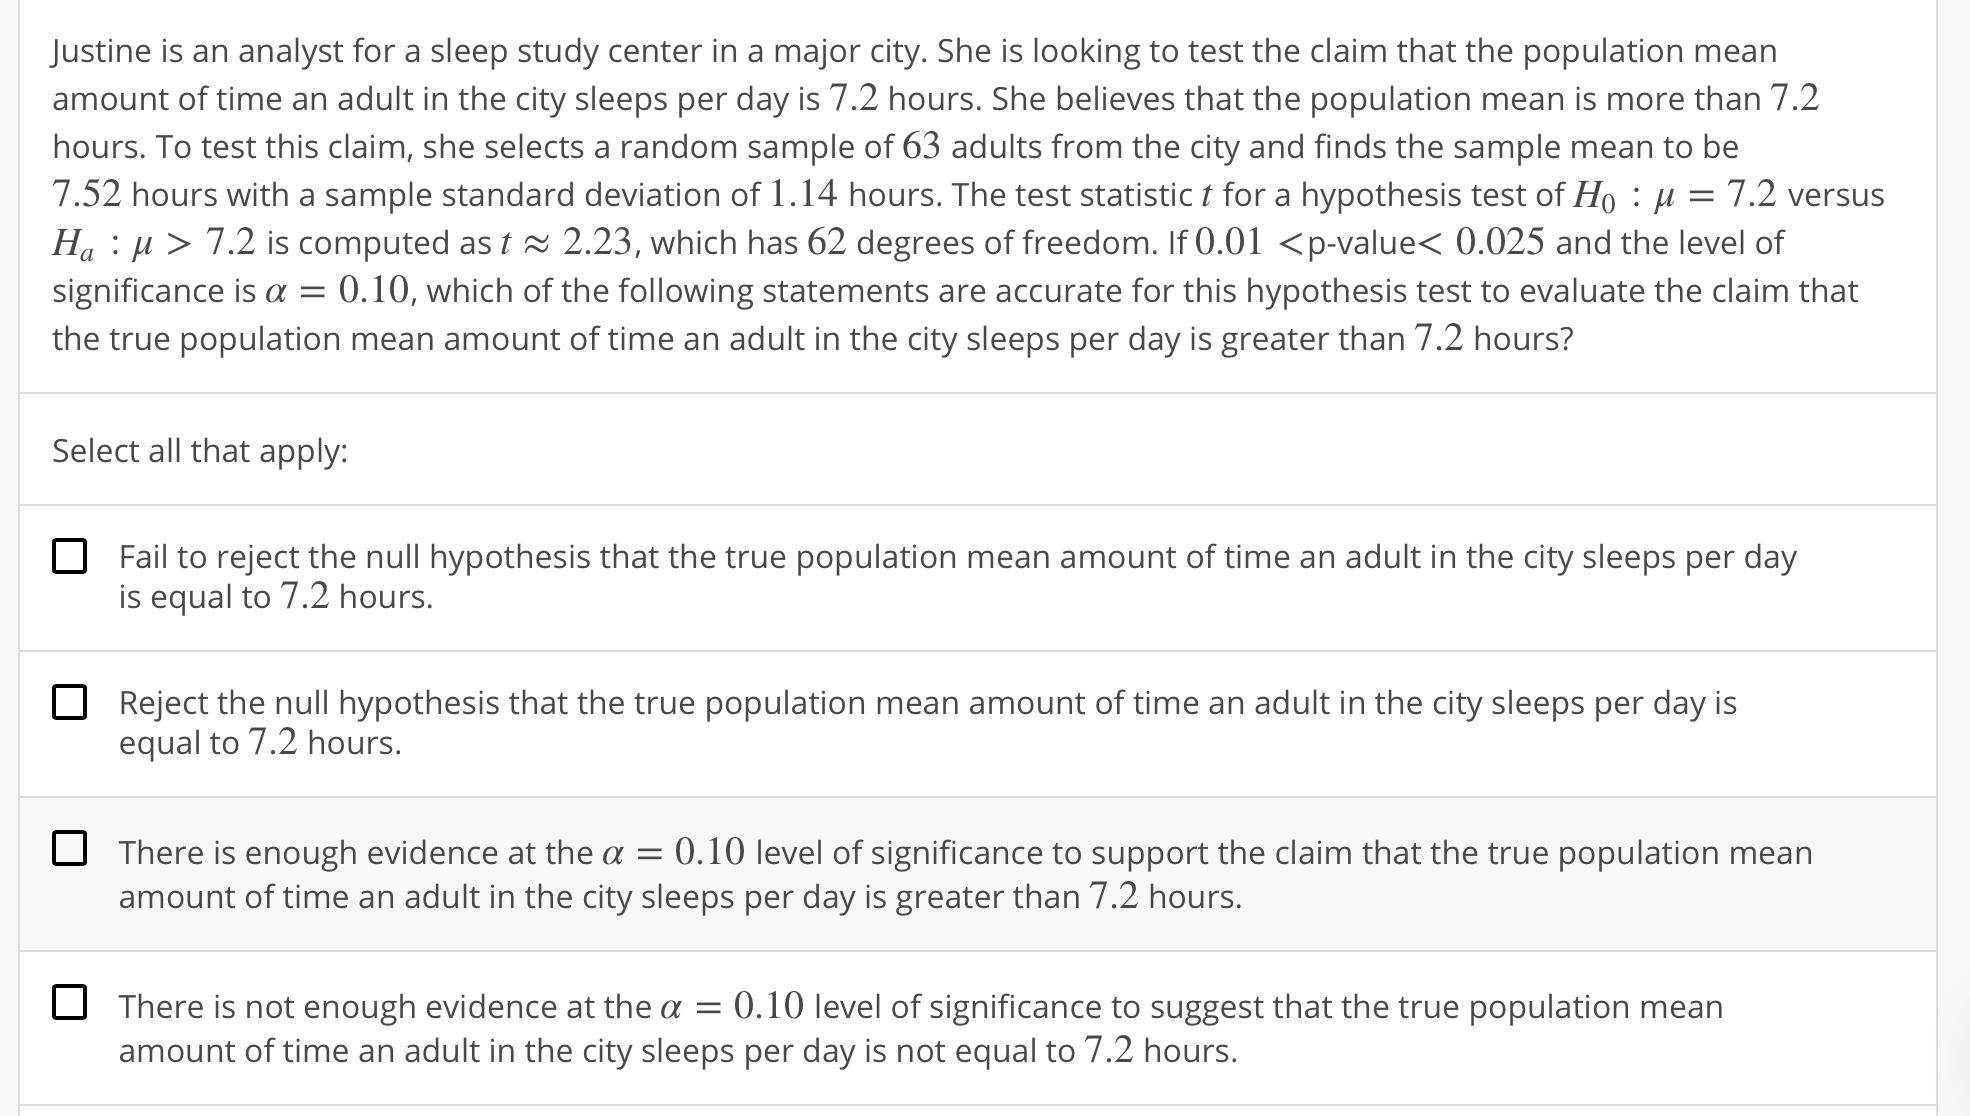 Justine is an analyst for a sleep study center in a major city. She is looking to test the claim that the population mean
amount of time an adult in the city sleeps per day is 7.2 hours. She believes that the population mean is more than 7.2
hours. To test this claim, she selects a random sample of 63 adults from the city and finds the sample mean to be
7.52 hours with a sample standard deviation of 1 . 14 hours. The test statistic t for a hypothesis test of Ho : μ = 7.2 versus
Ha : μ 〉 7.2 is computed as t 2.23, which has 62 degrees of freedom. If 0.01 〈p-value< 0.025 and the level of
significance is α = 0.10, which of the following statements are accurate for this hypothesis test to evaluate the claim that
the true population mean amount of time an adult in the city sleeps per day is greater than 7.2 hours?
Select all that apply:
Fail to reject the null hypothesis that the true population mean amount of time an adult in the city sleeps per day
is equal to 7.2 hours.
Reject the null hypothesis that the true population mean amount of time an adult in the city sleeps per day is
equal to 7.2 hours.
O
There is enough evidence at the α-0. 10 level of significance to support the claim that the true population mean
amount of time an adult in the city sleeps per day is greater than 7.2 hours.
There is not enough evidence at the a 0.10 level of significance to suggest that the true population mean
amount of time an adult in the city sleeps per day is not equal to 7.2 hours.
